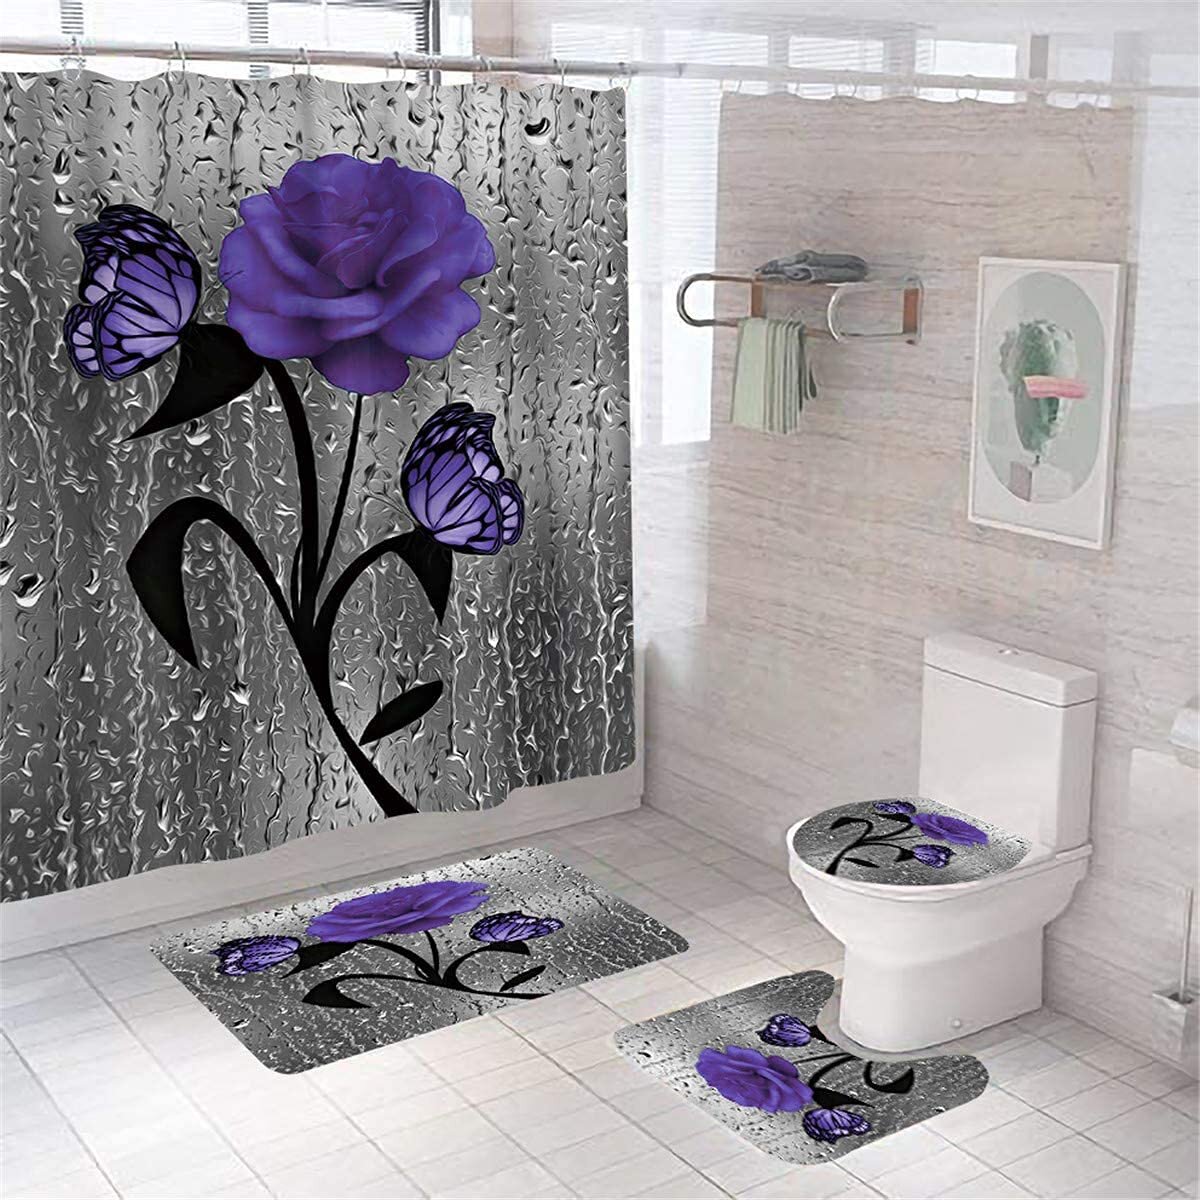 Details about   Bee Shower Curtain Fabric Bathroom Decor Set with Hooks 4 Sizes 